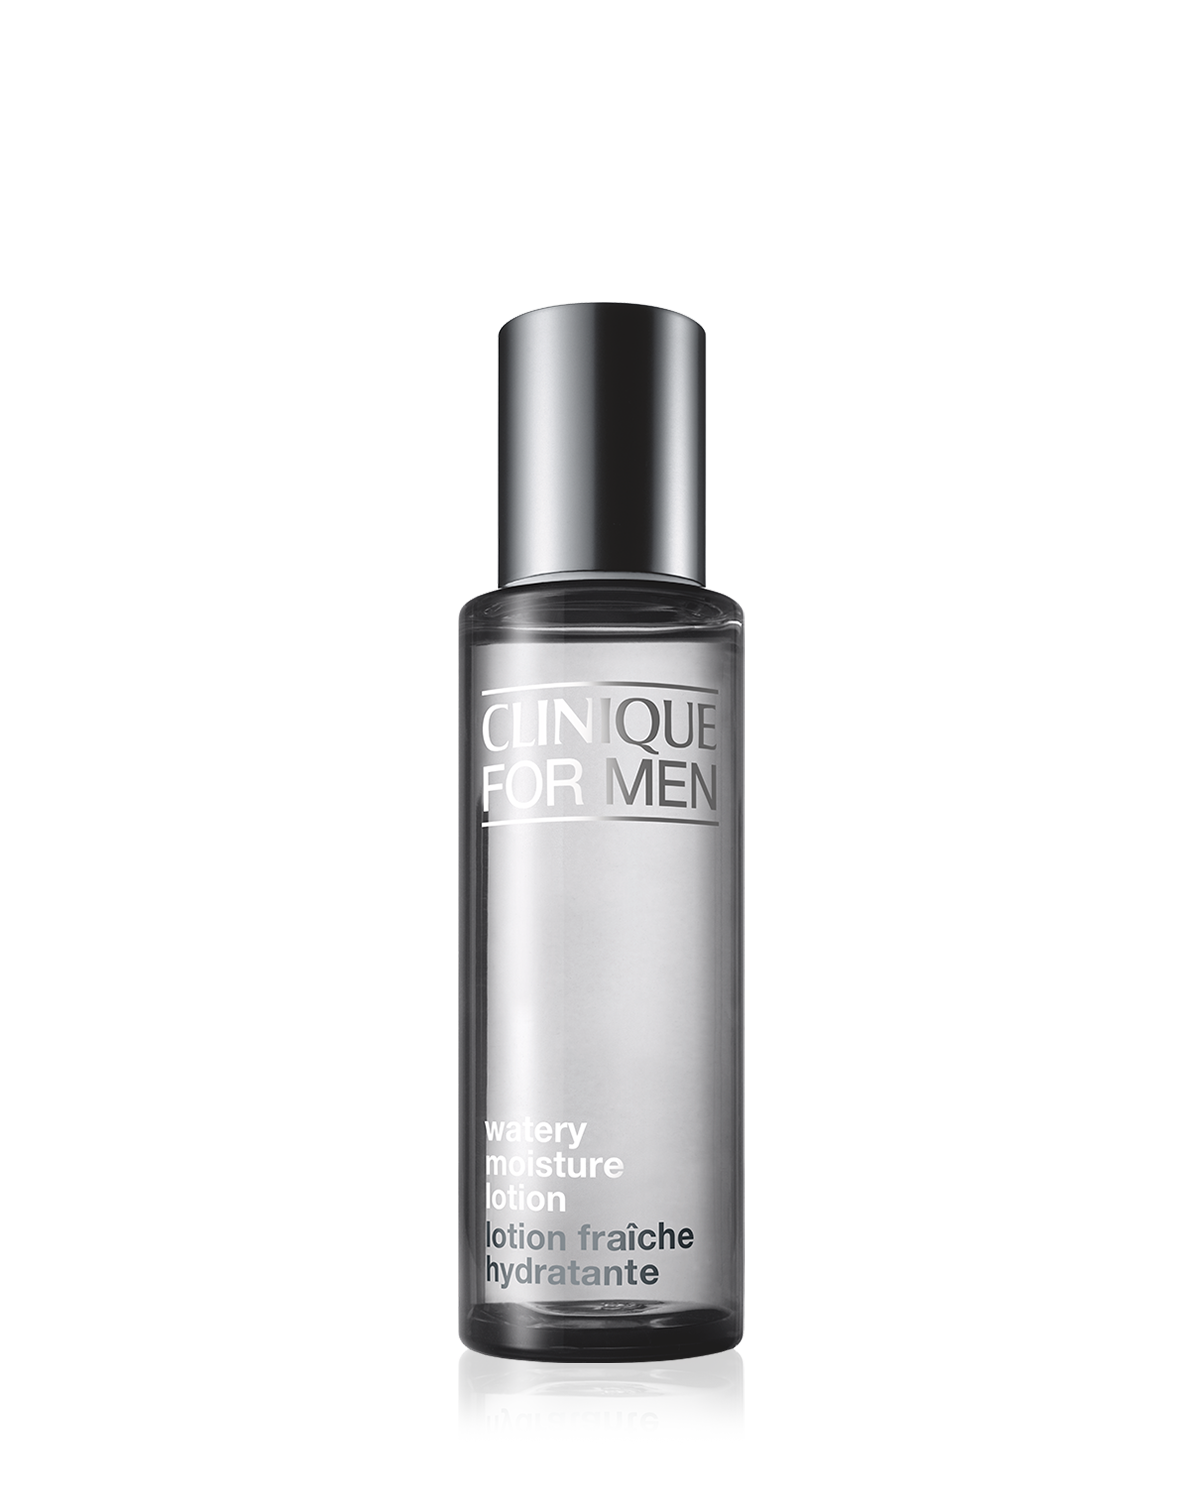 Clinique For Men Watery Moisture Lotion